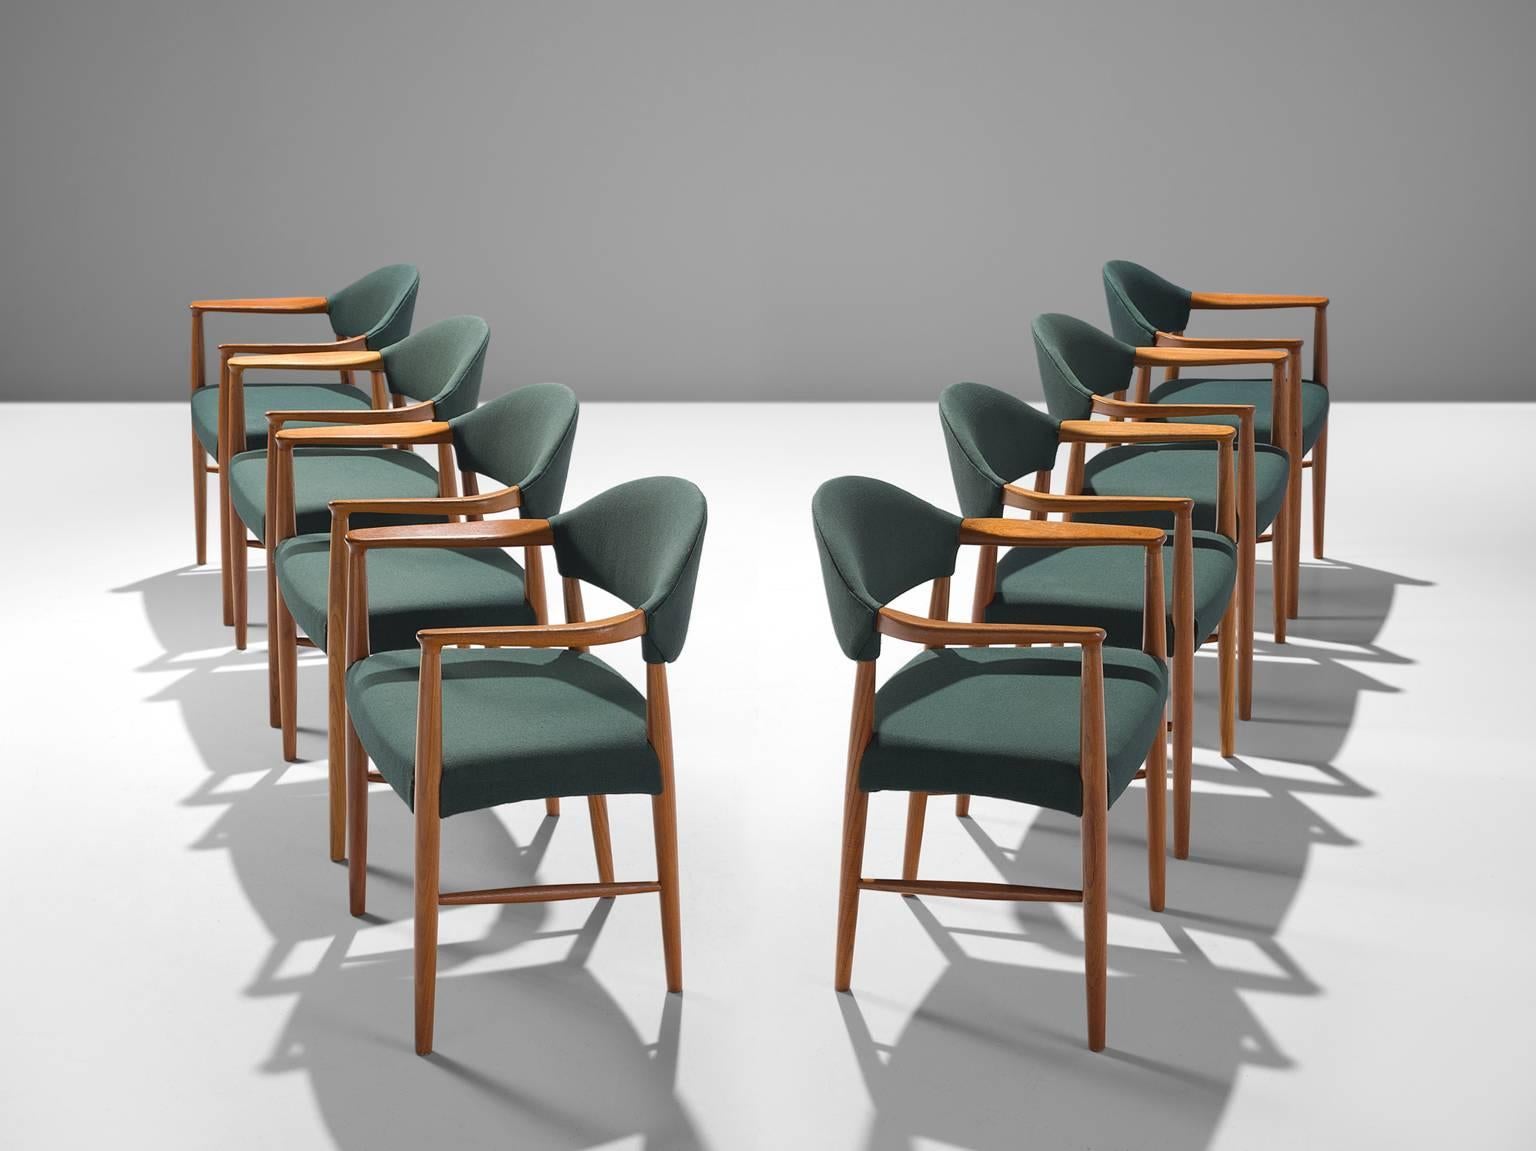 Set of eight armchairs, in teak and green upholstery, Denmark, 1950s. 

Very comfortable dining chairs, due to well-shaped armrests and ergonomic proportions of the back and seat. The sculptural back is very attractive, as the beautifully curved